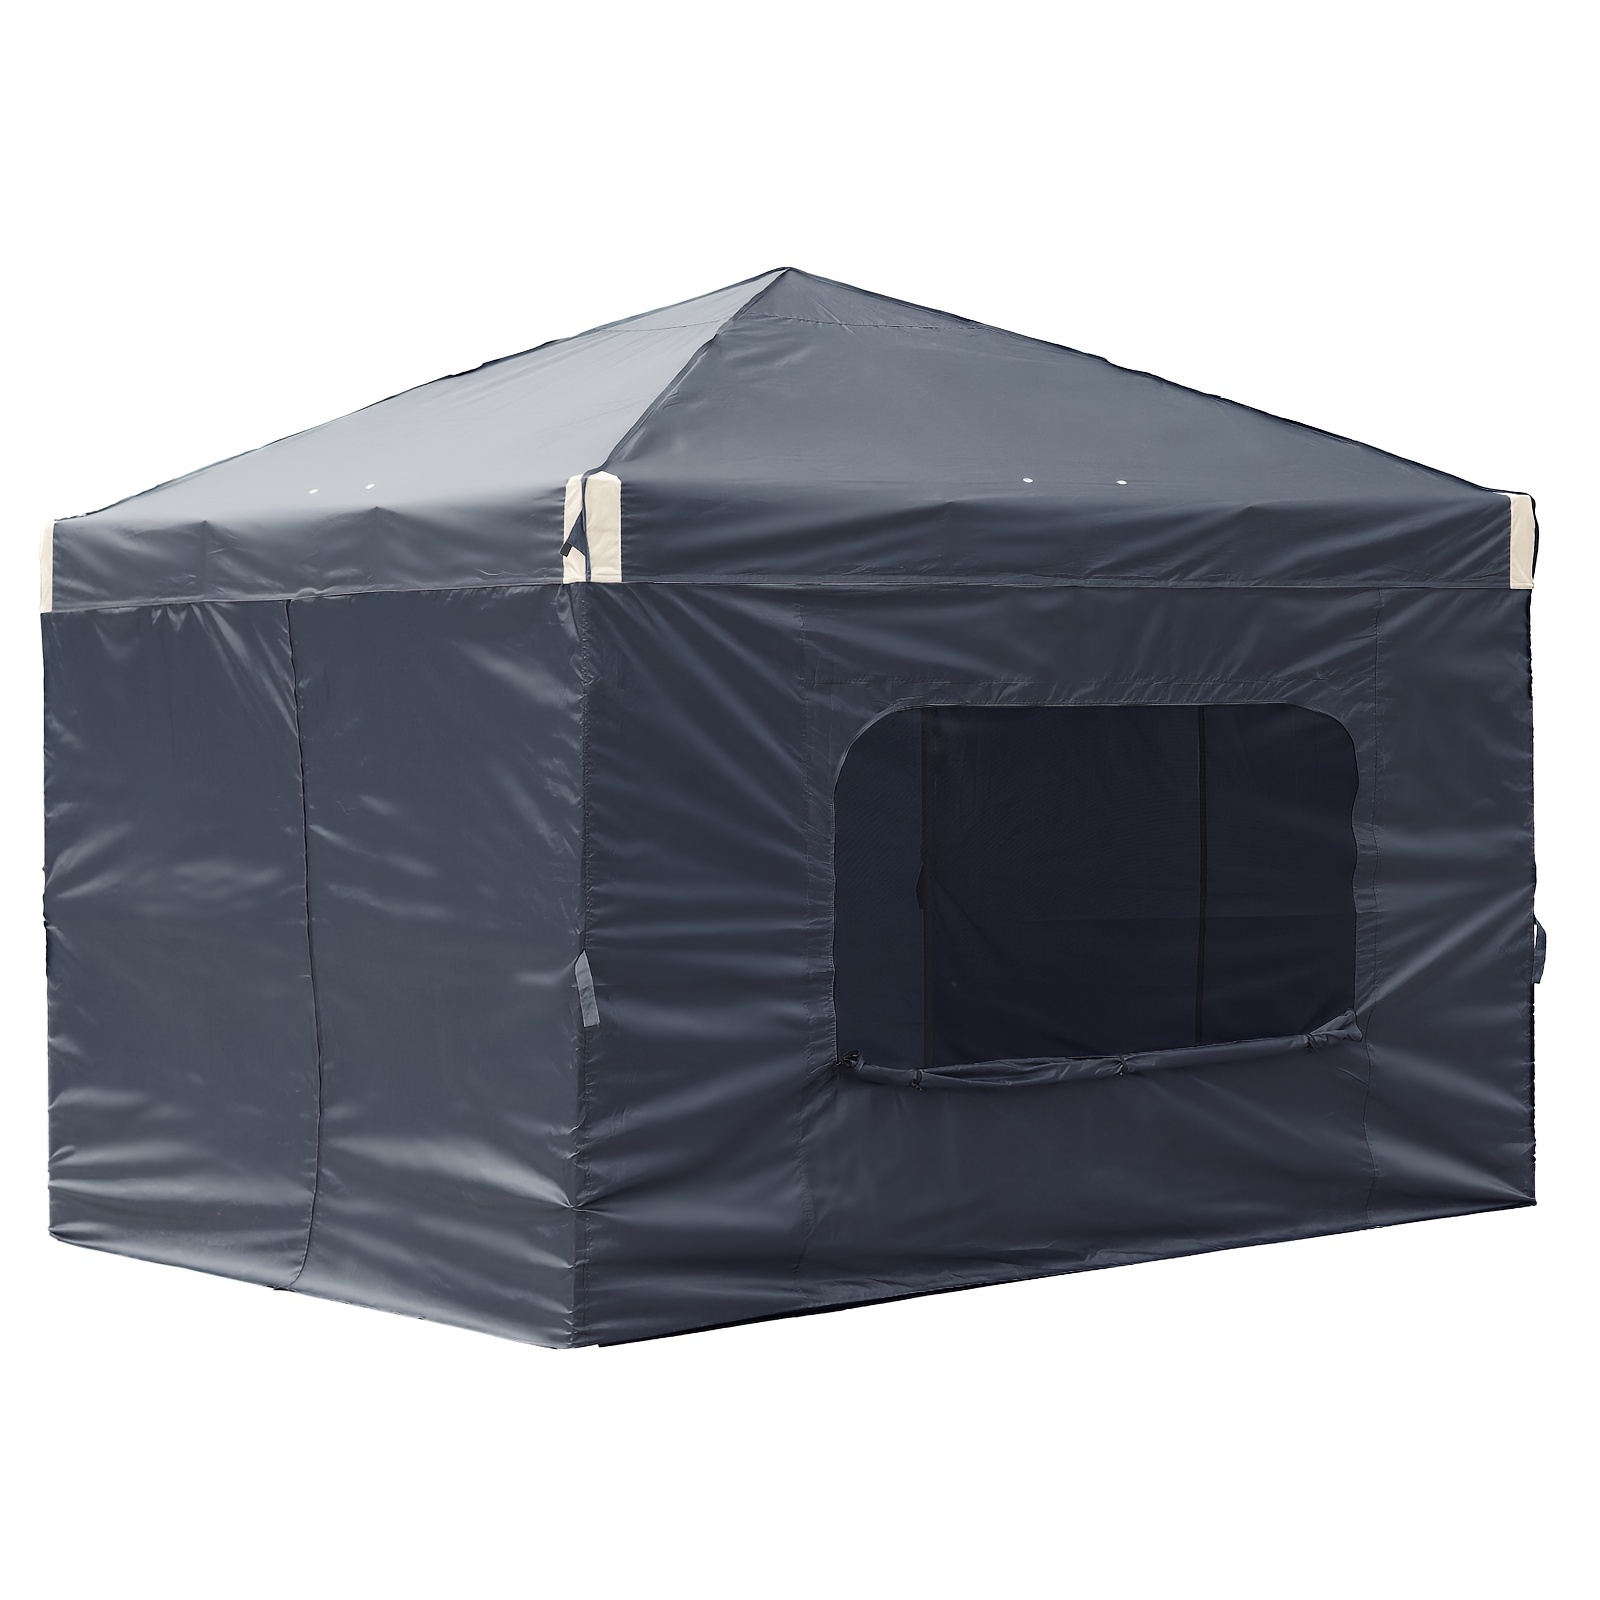 

10 X 10 Ft Pop Up Canopy Tent Portable Instant Shade Canopy With Curtain For Camping, Party And Other Outdoor Events - Black